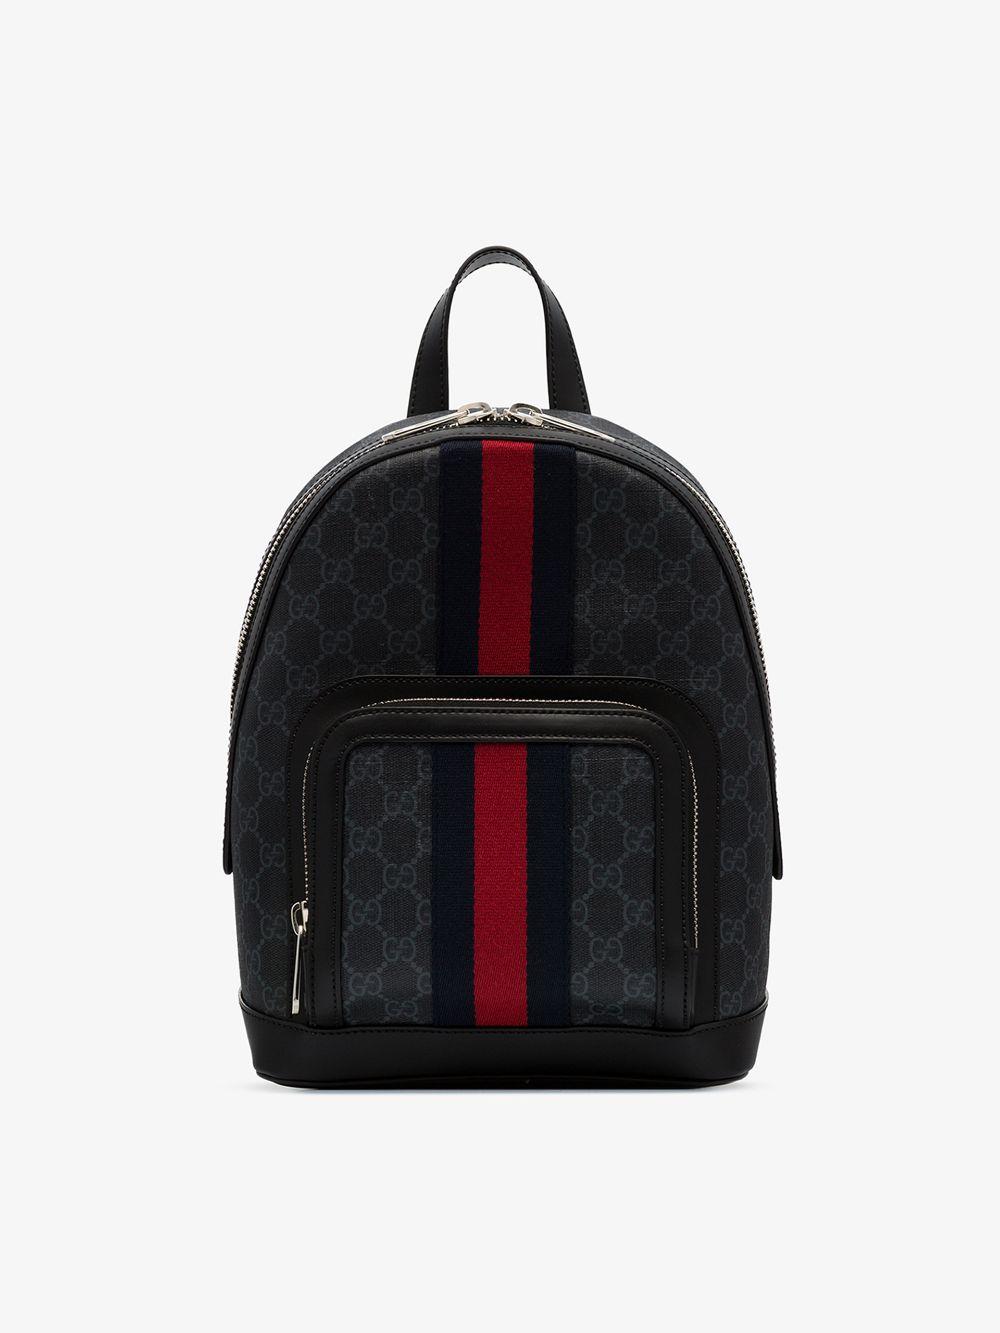 gucci backpack with stripe